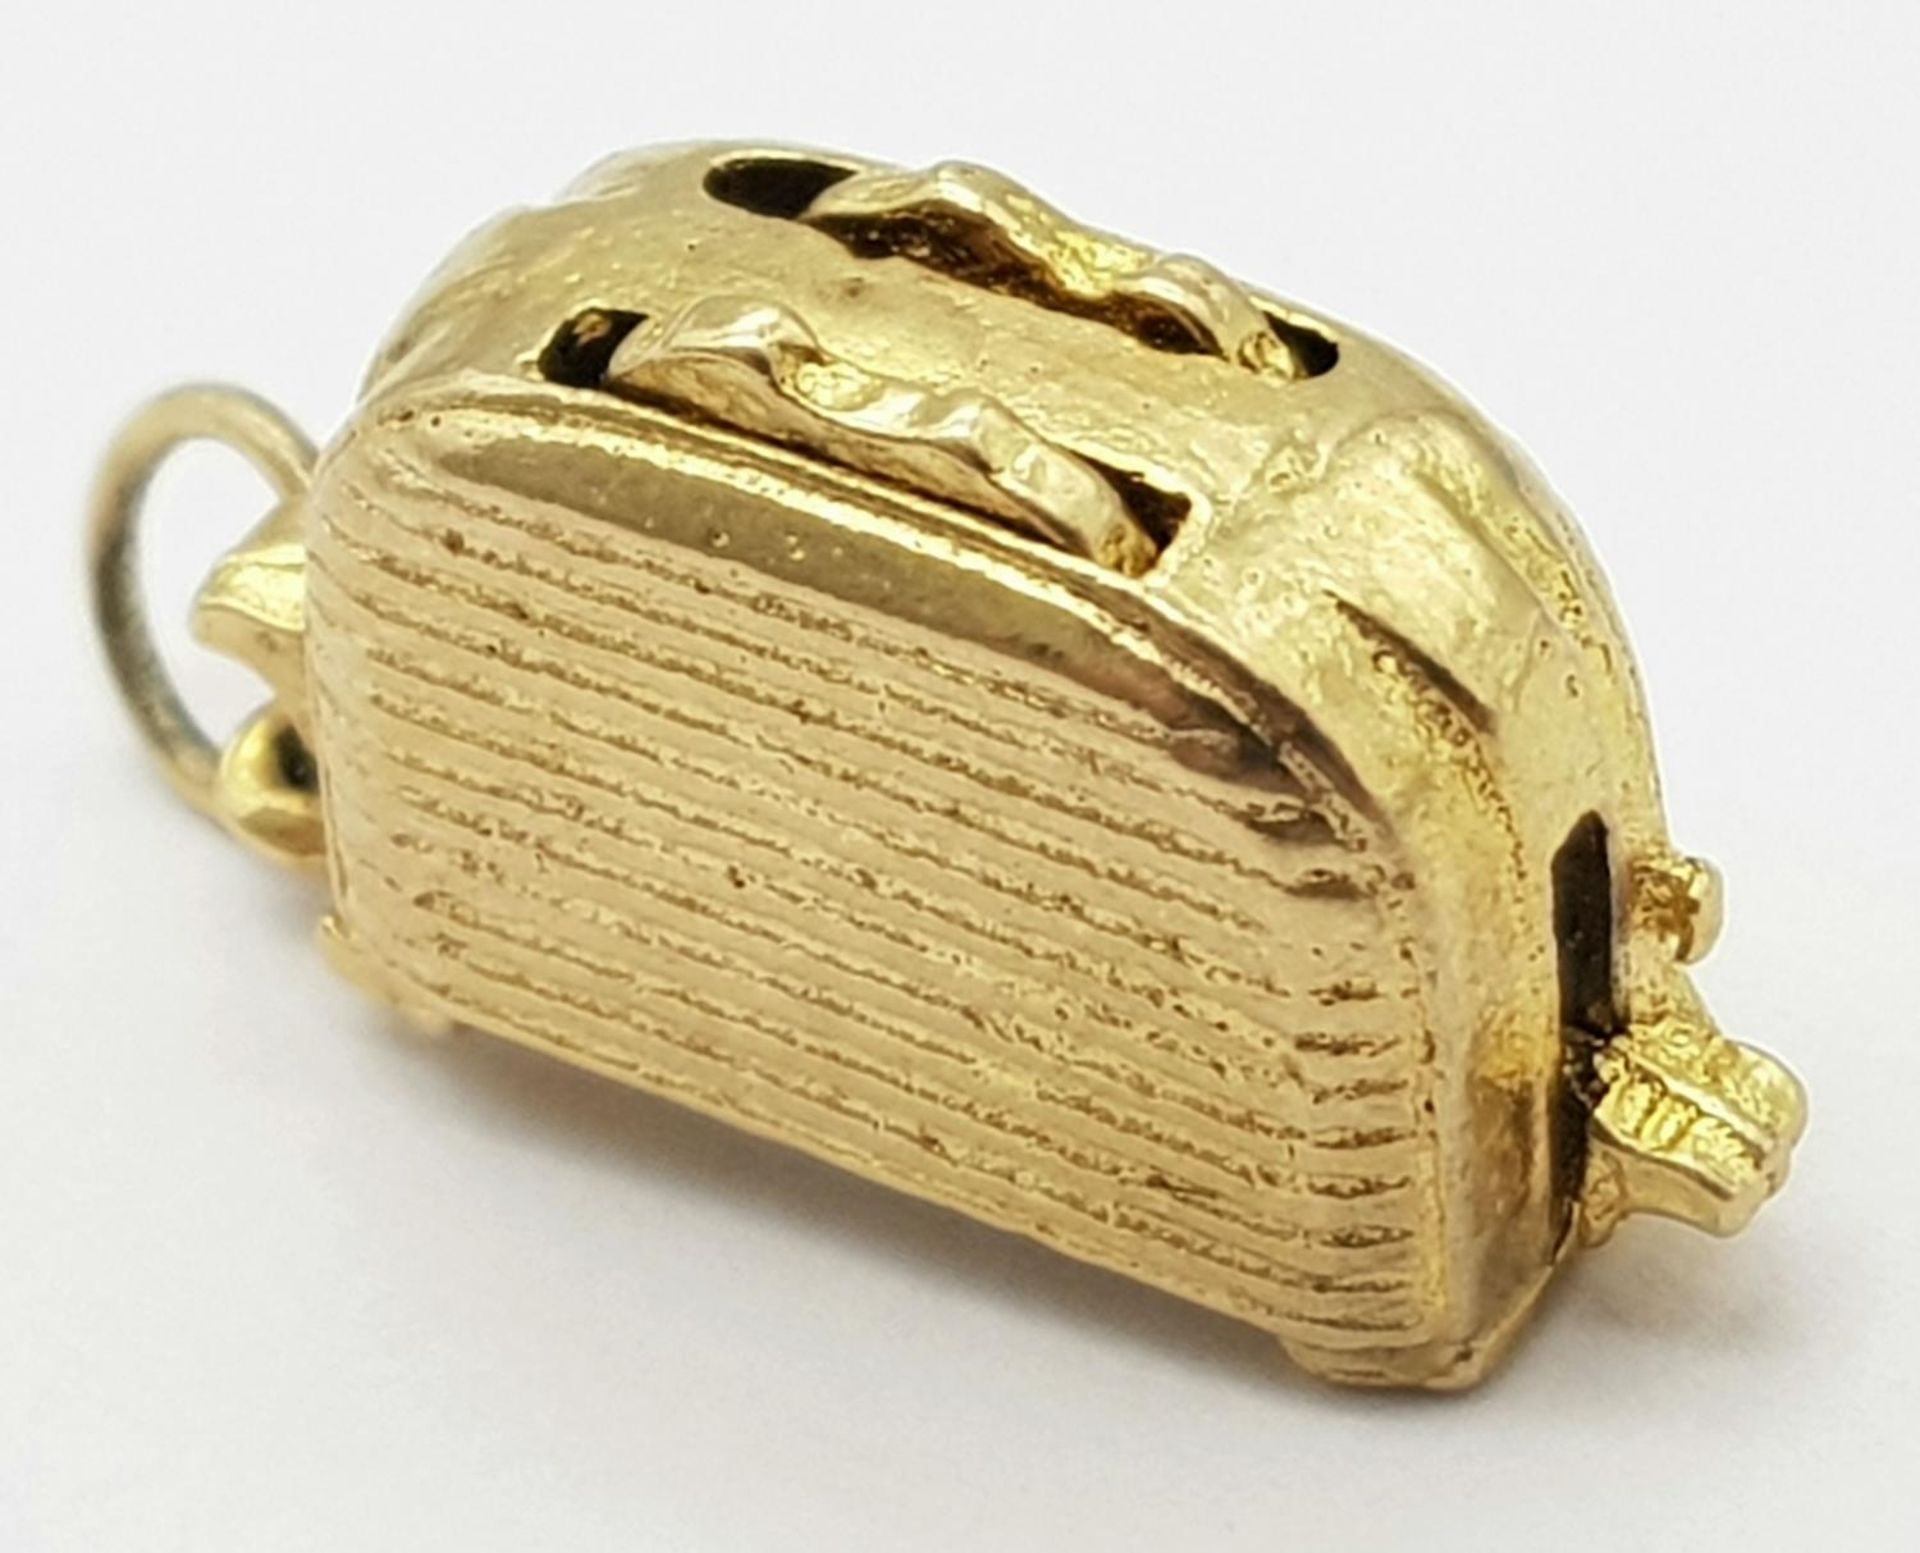 A 9K YELLOW GOLD TOASTER CHARM, WHICH HAS TOAST THAT YOU CAN FLIP OUT VERY CUTE 5.5G , approx 20mm x